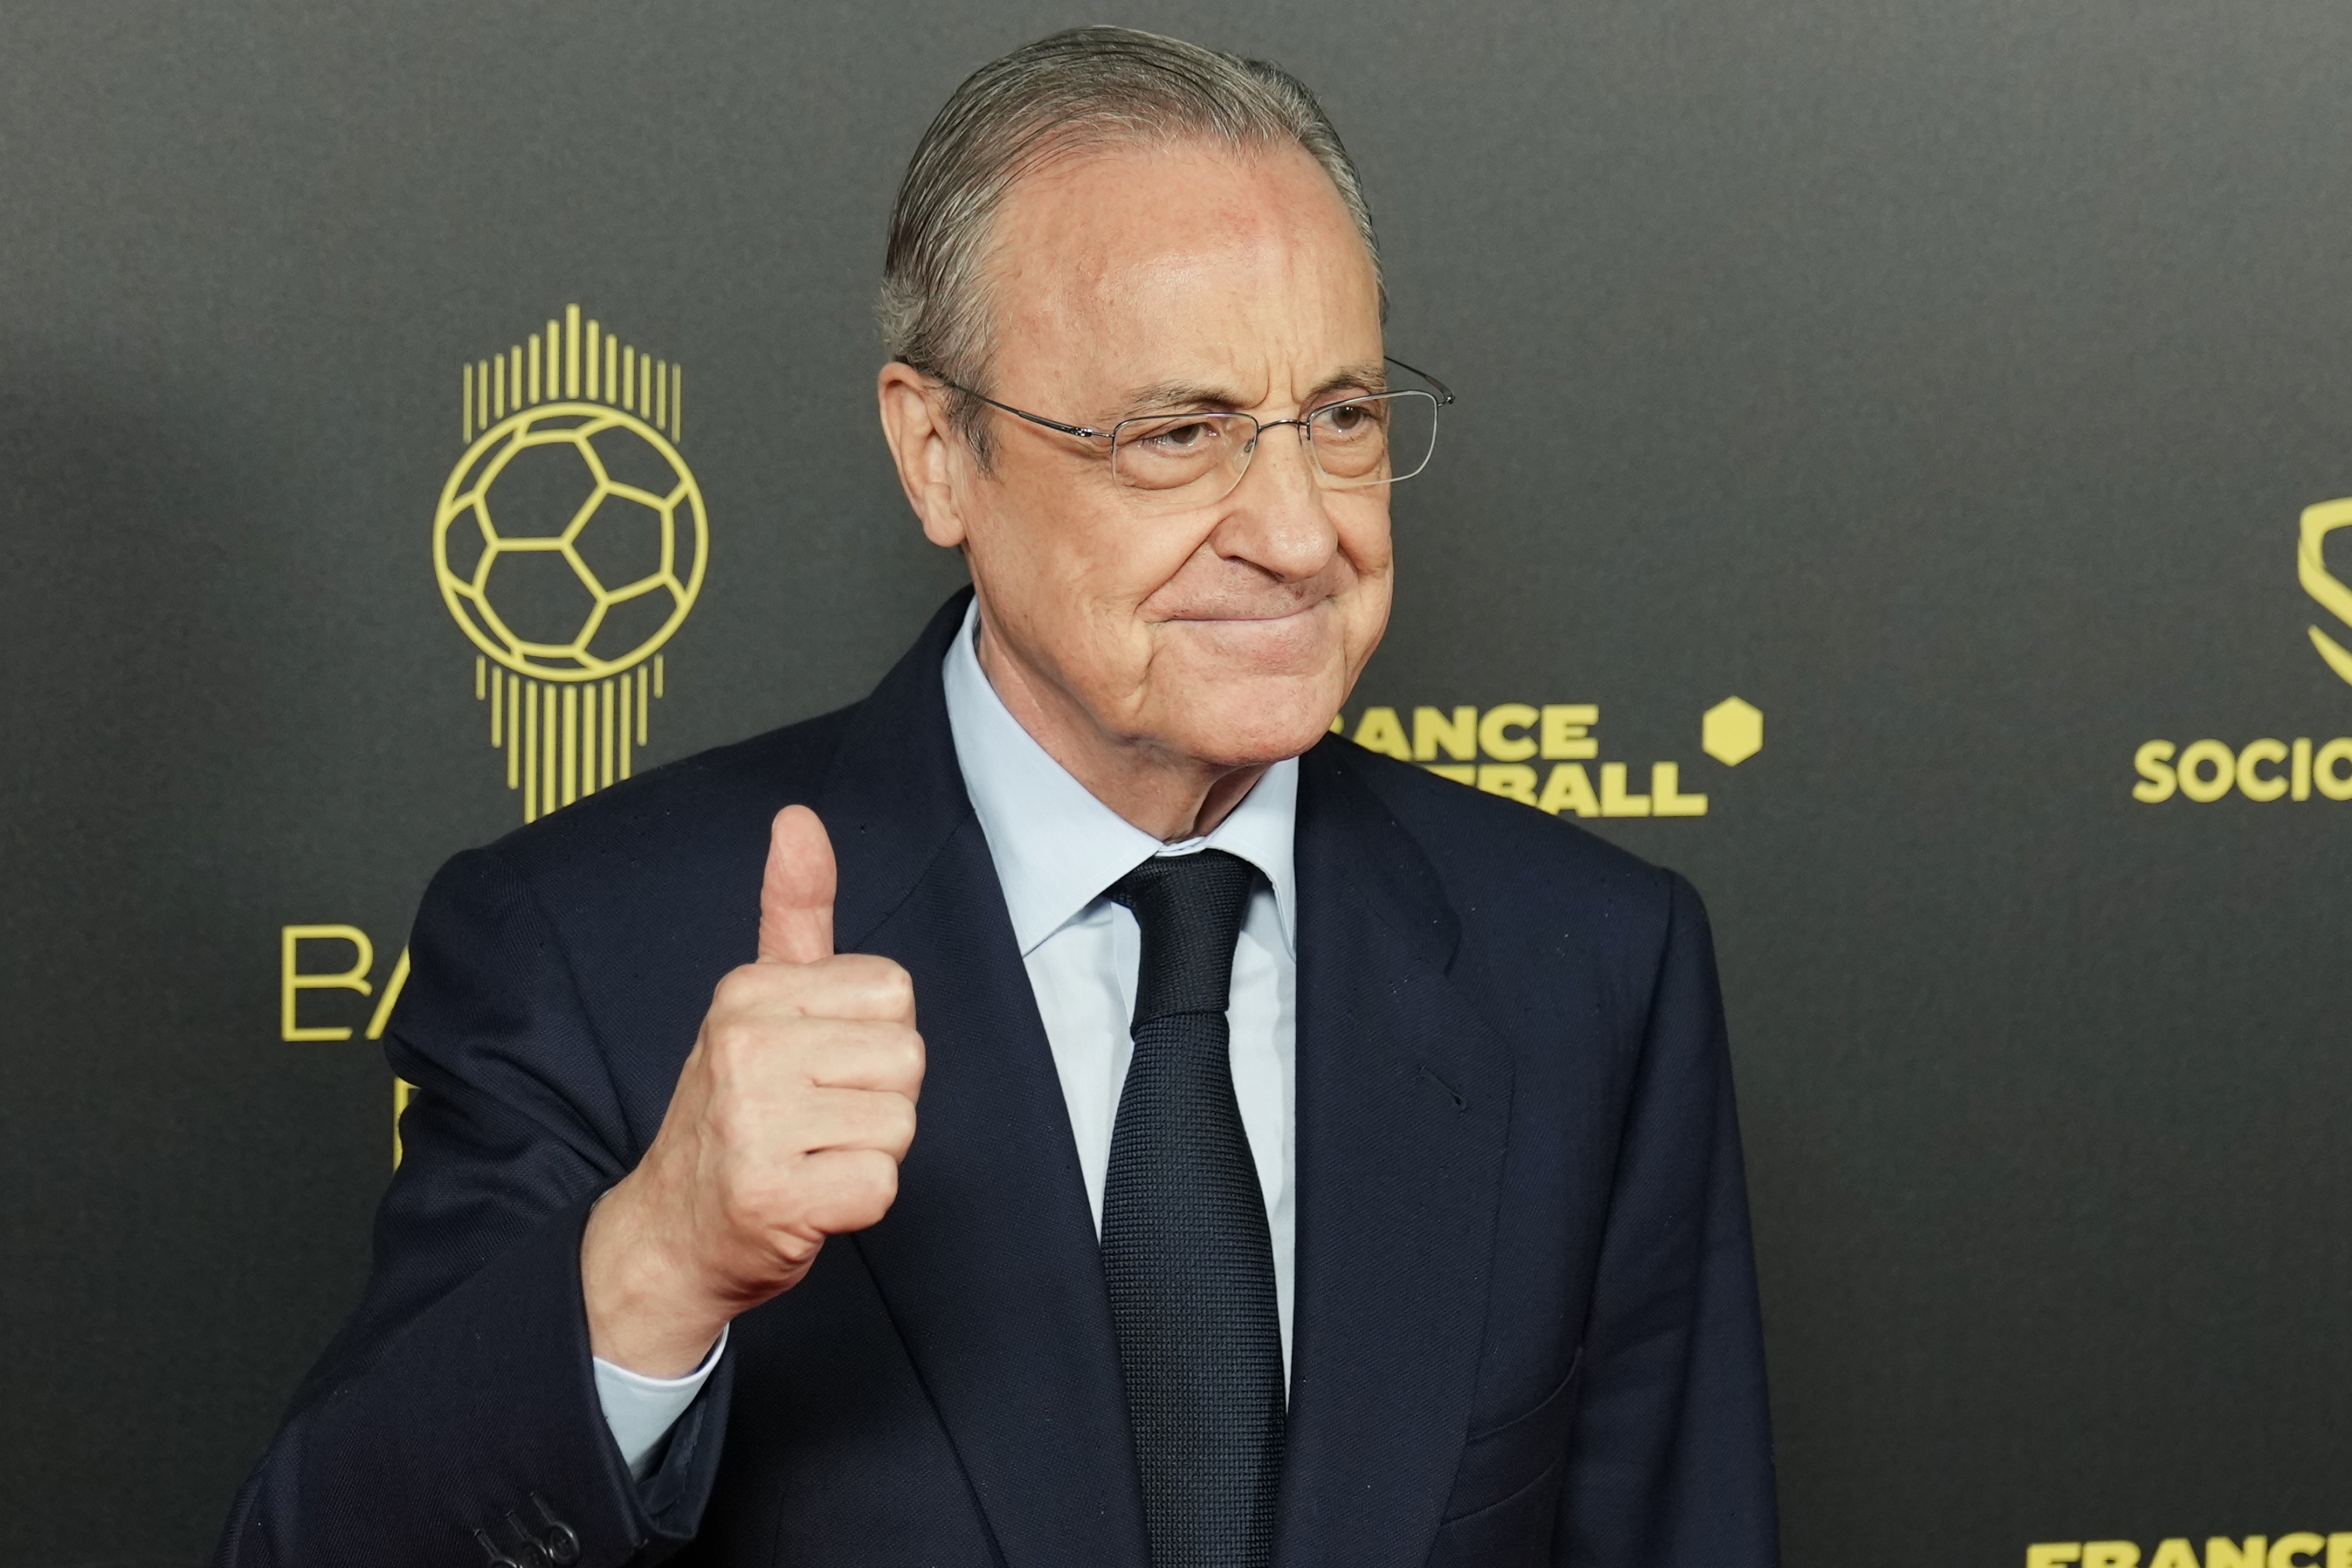 FILE - Real Madrid president Florentino Perez poses for a picture prior the 66th Ballon d'Or ceremony at Theatre du Chatelet in Paris, France, Monday, Oct. 17, 2022. The European Union?s top court has ruled UEFA and FIFA acted contrary to EU competition law by blocking plans for the breakaway Super League. The case was heard last year at the Court of Justice after Super League failed at launch in April 2021. UEFA President Aleksander Ceferin called the club leaders ?snakes? and ?liars.? (AP Photo/Francois Mori, File)